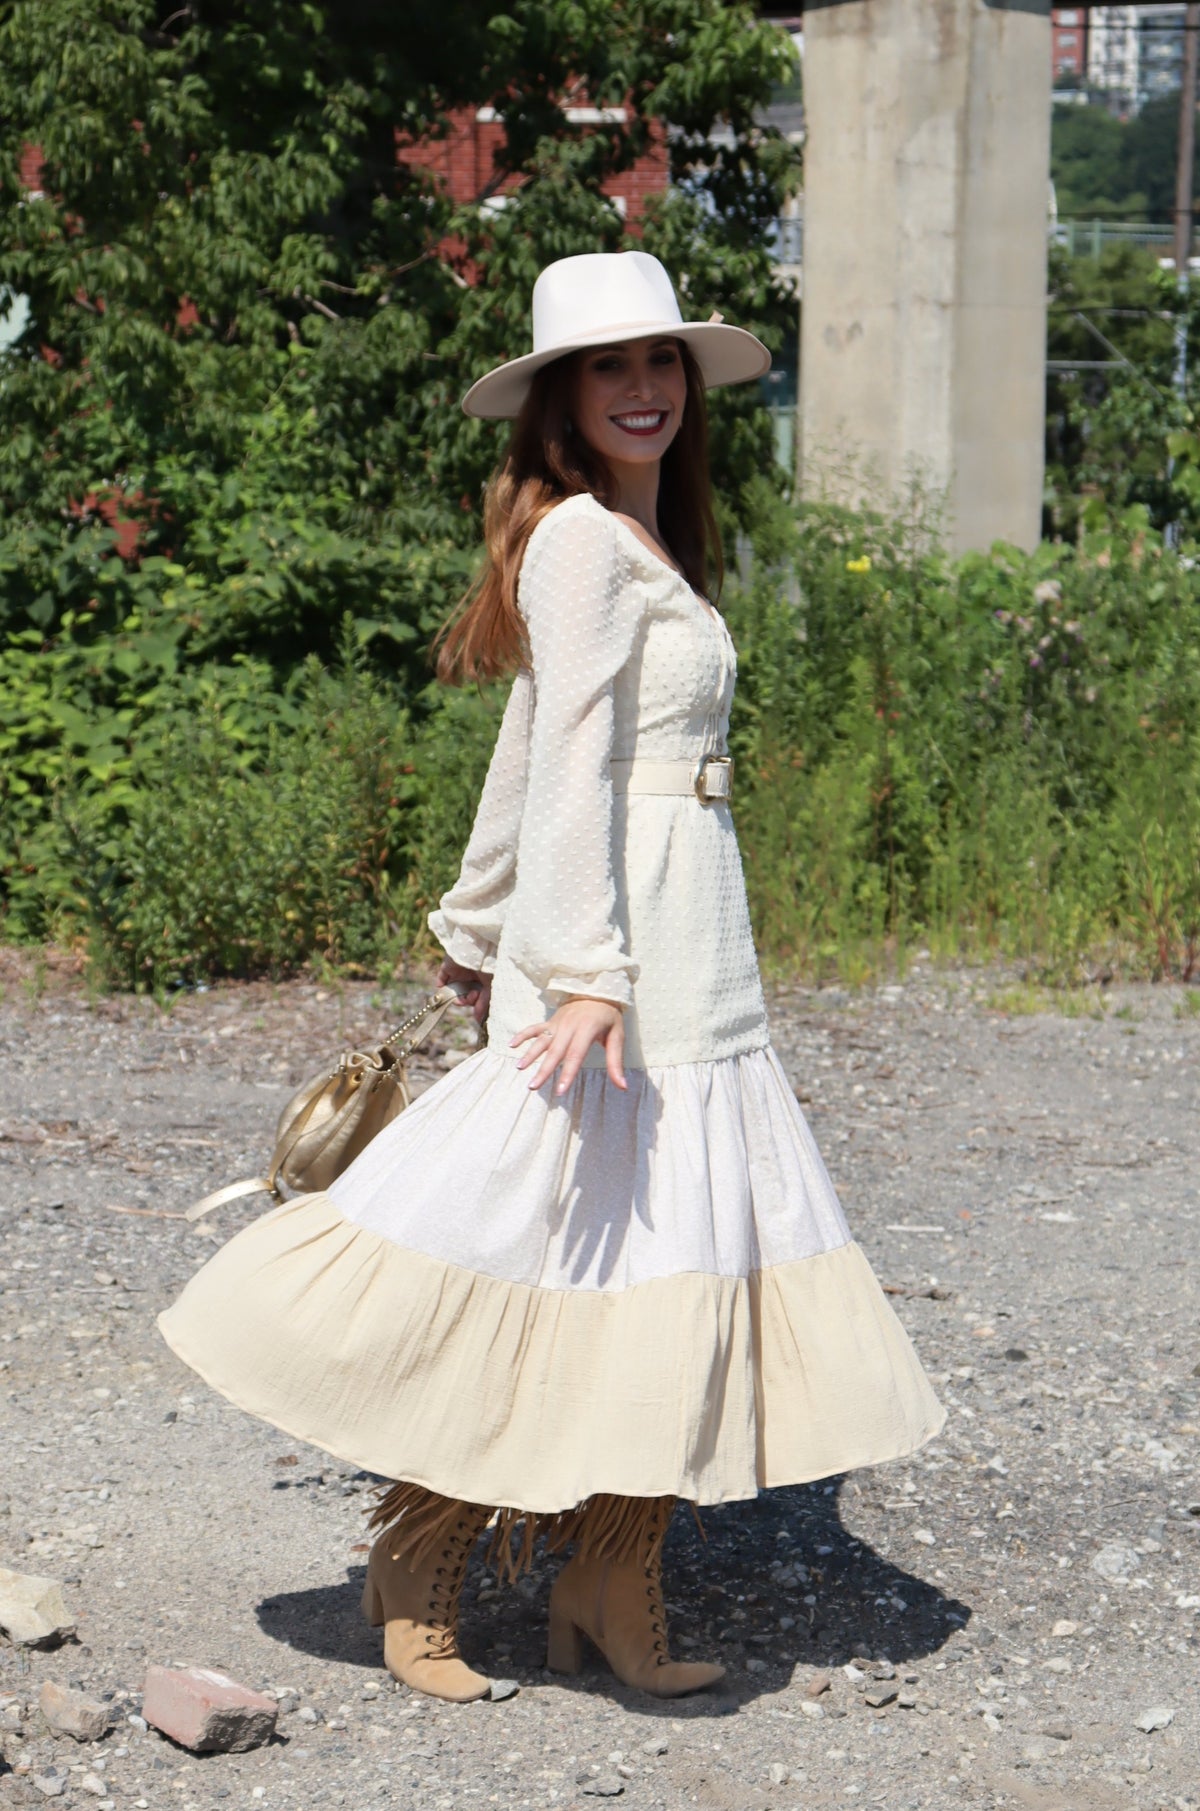 Model wearing dress with three different fabrics, Swiss Dot, Calico and Gauze midi dress, a belt, hat and purse smiling.